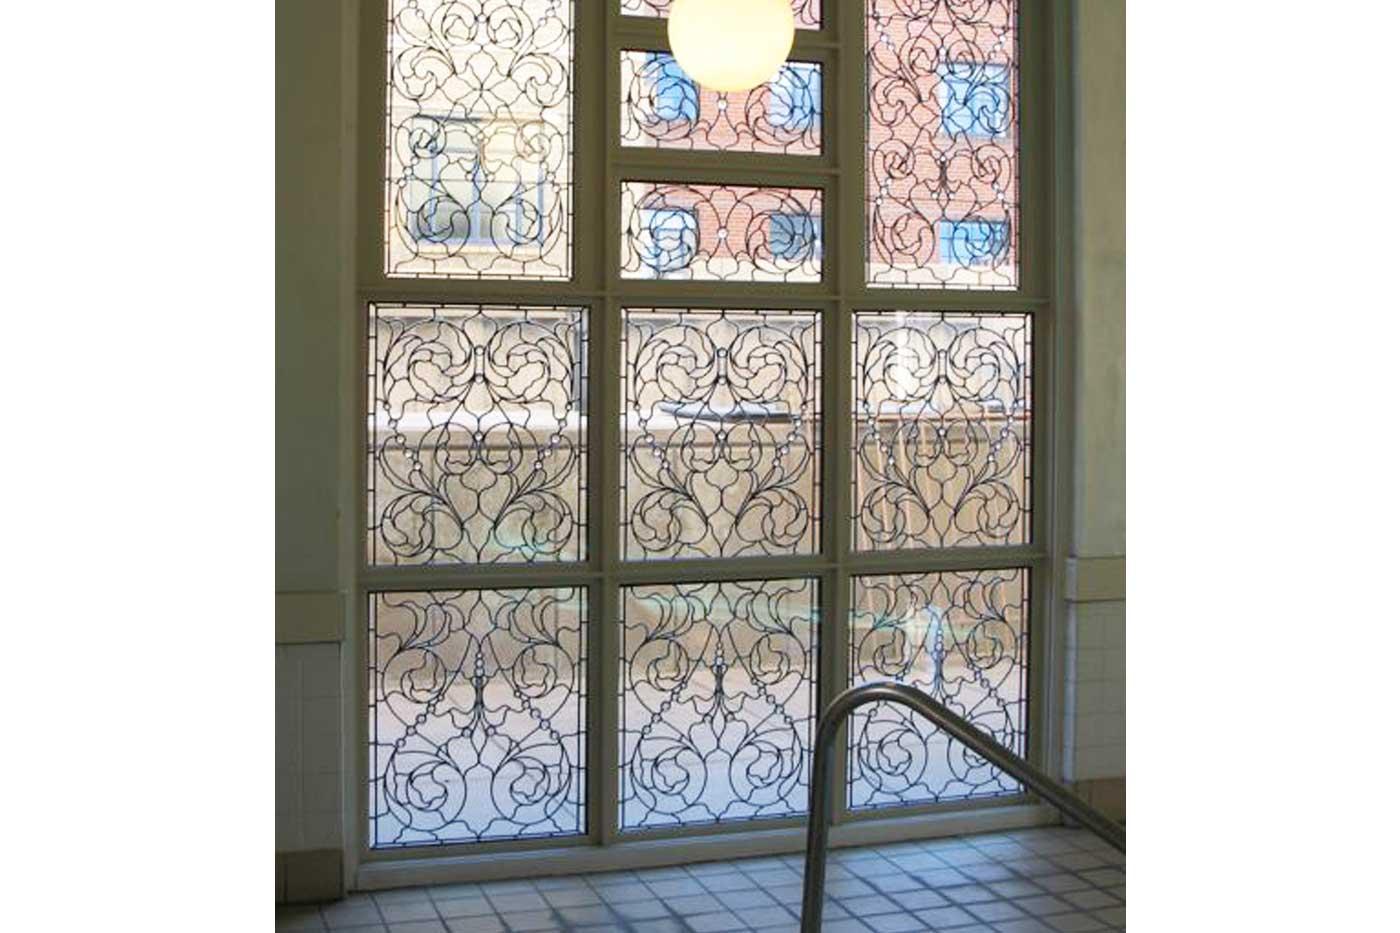 Without the use of color, Wolff is able to add intrigue and dimension to a window through her intricate designs.